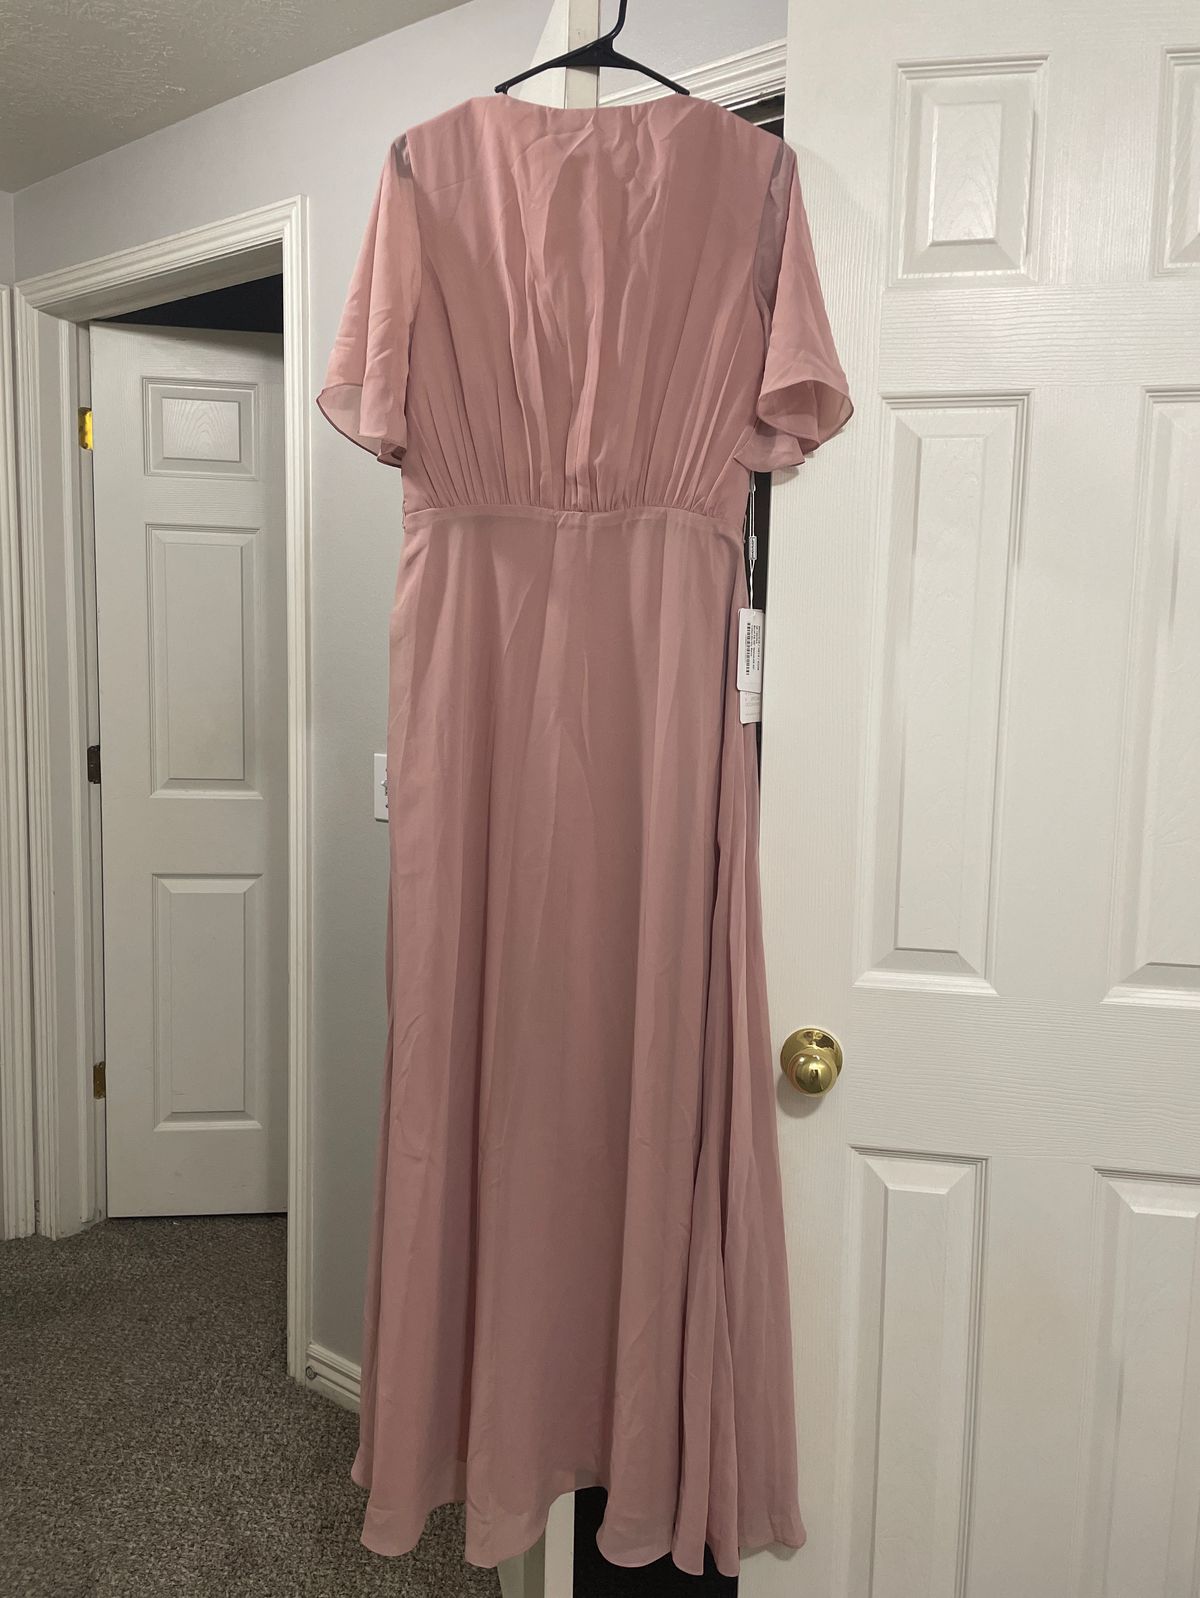 Jjs house Size 10 Bridesmaid Pink A-line Dress on Queenly